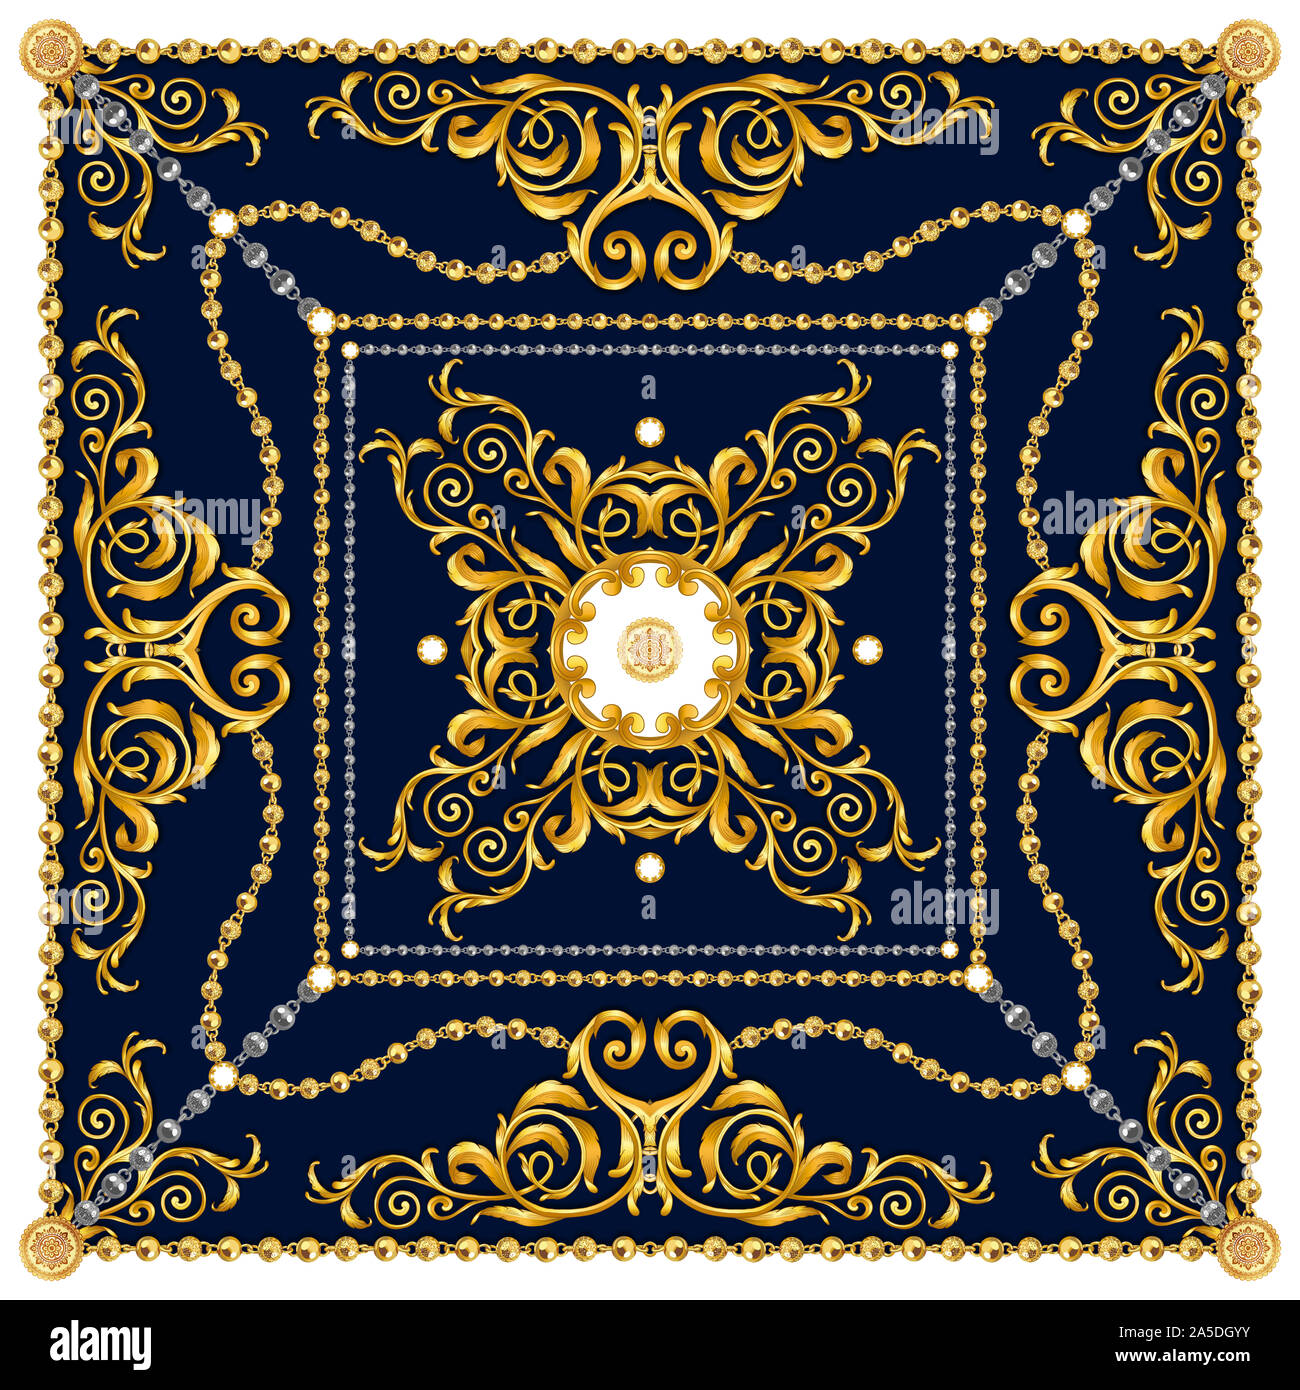 Impressionisme Overtuiging Sleutel Versace Style Pattern Ready for Textile. Scarf Design for Silk Print.  Golden Baroque with Chains on Dark Blue Background Stock Photo - Alamy